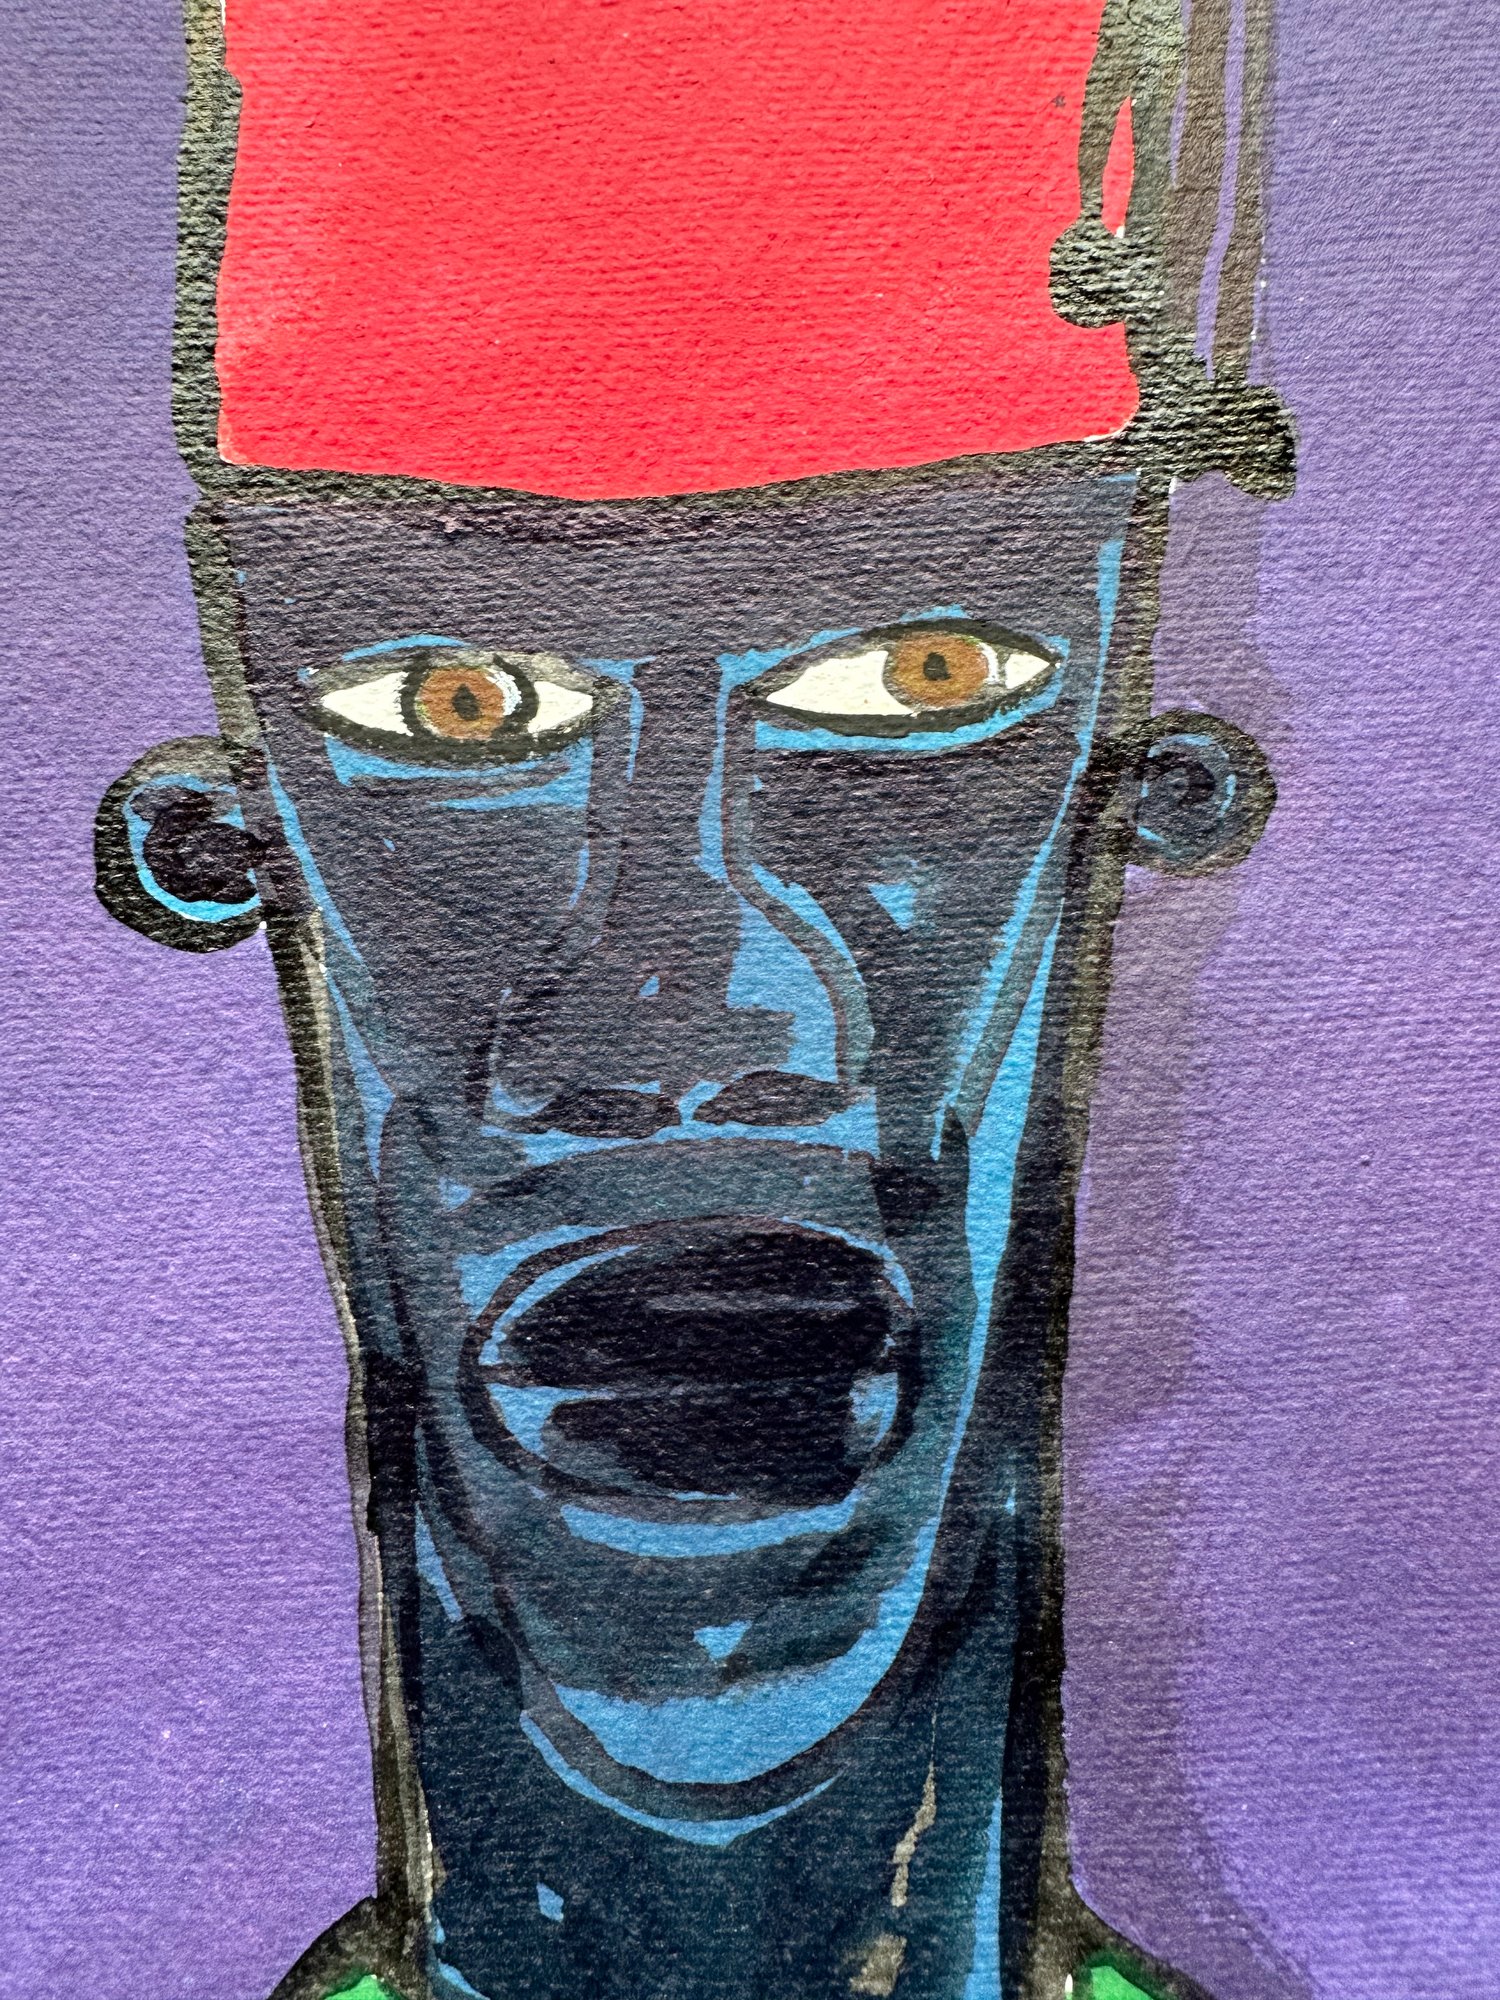 Image of 'BOY IN FEZ' by STEPHEN ANTHONY DAVIDS